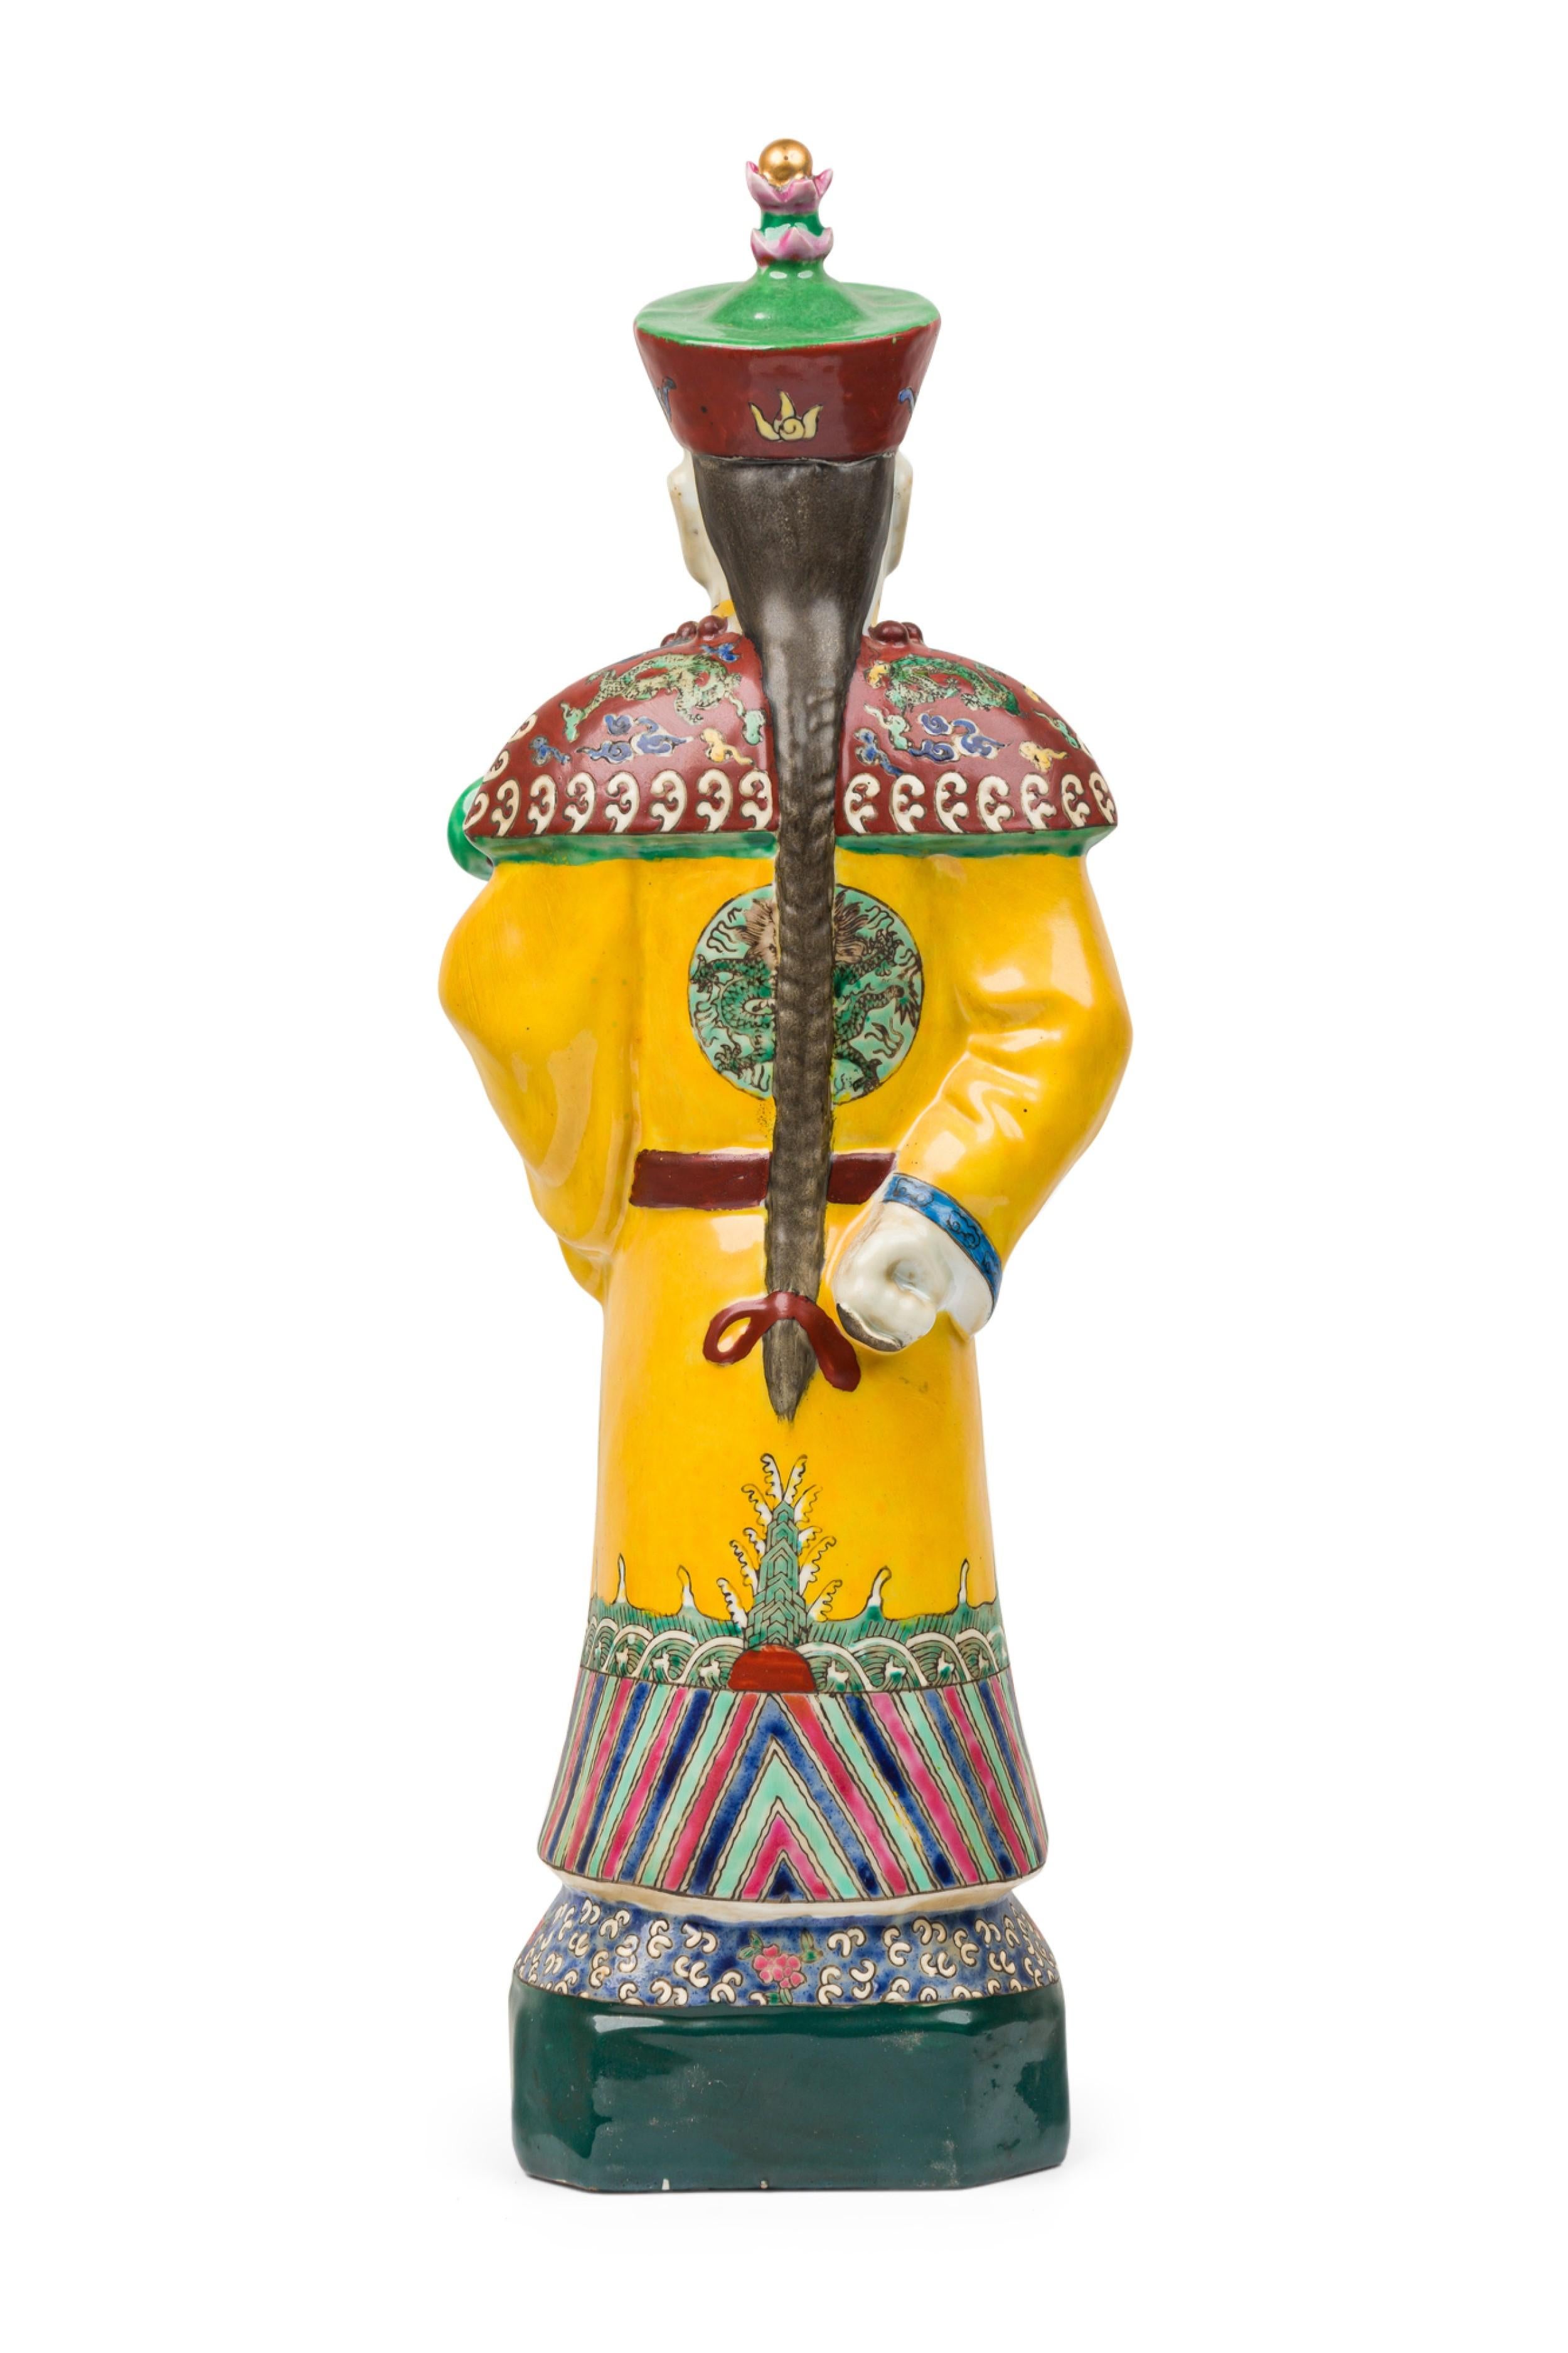 Pair of Chinese Painted Ceramic Figures Depicting a Yellow Robed Emperor For Sale 2